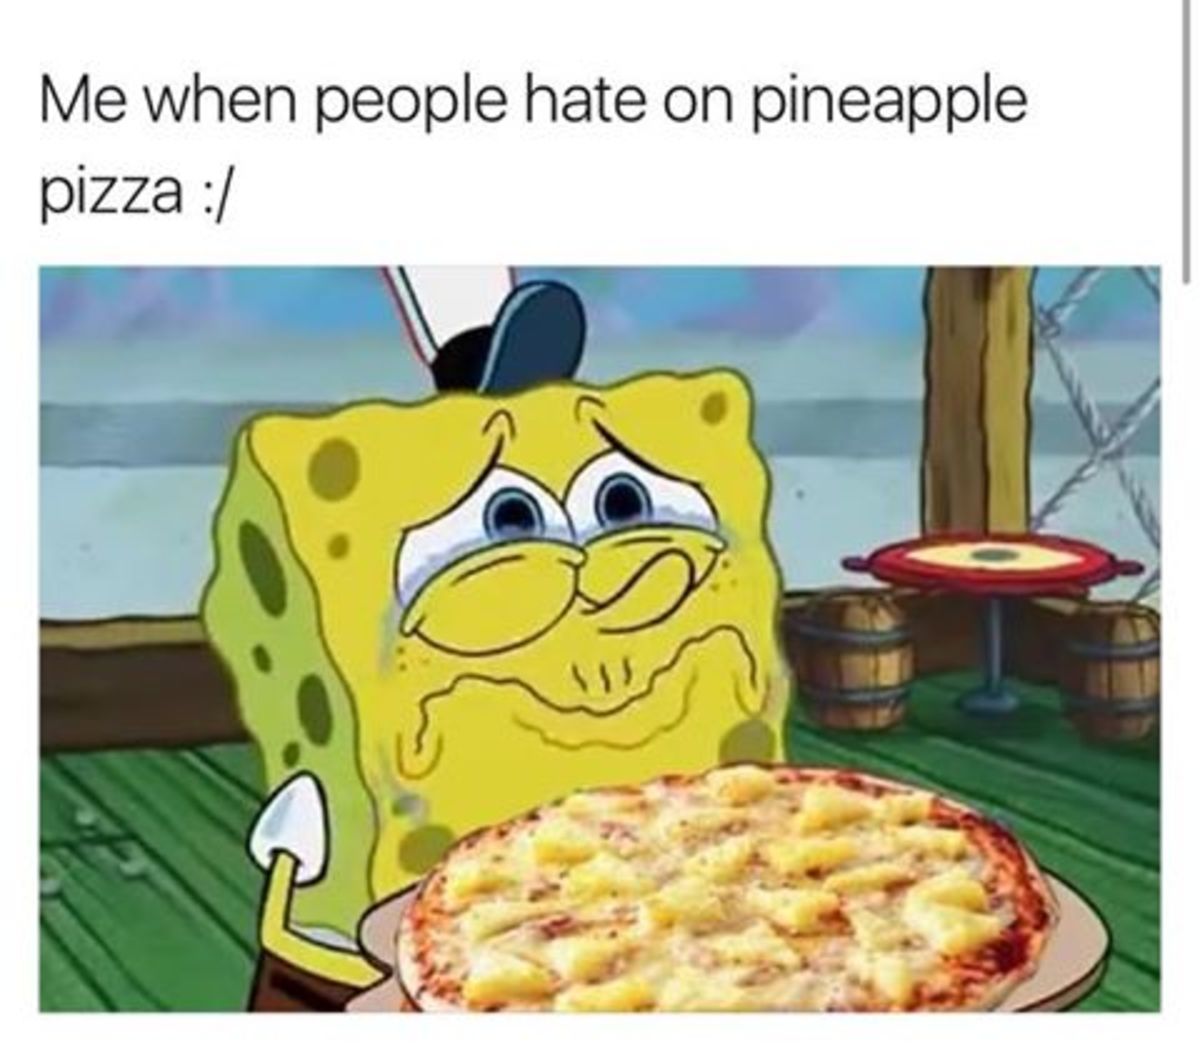 Pineapple Pizza: Get Over It, Haters